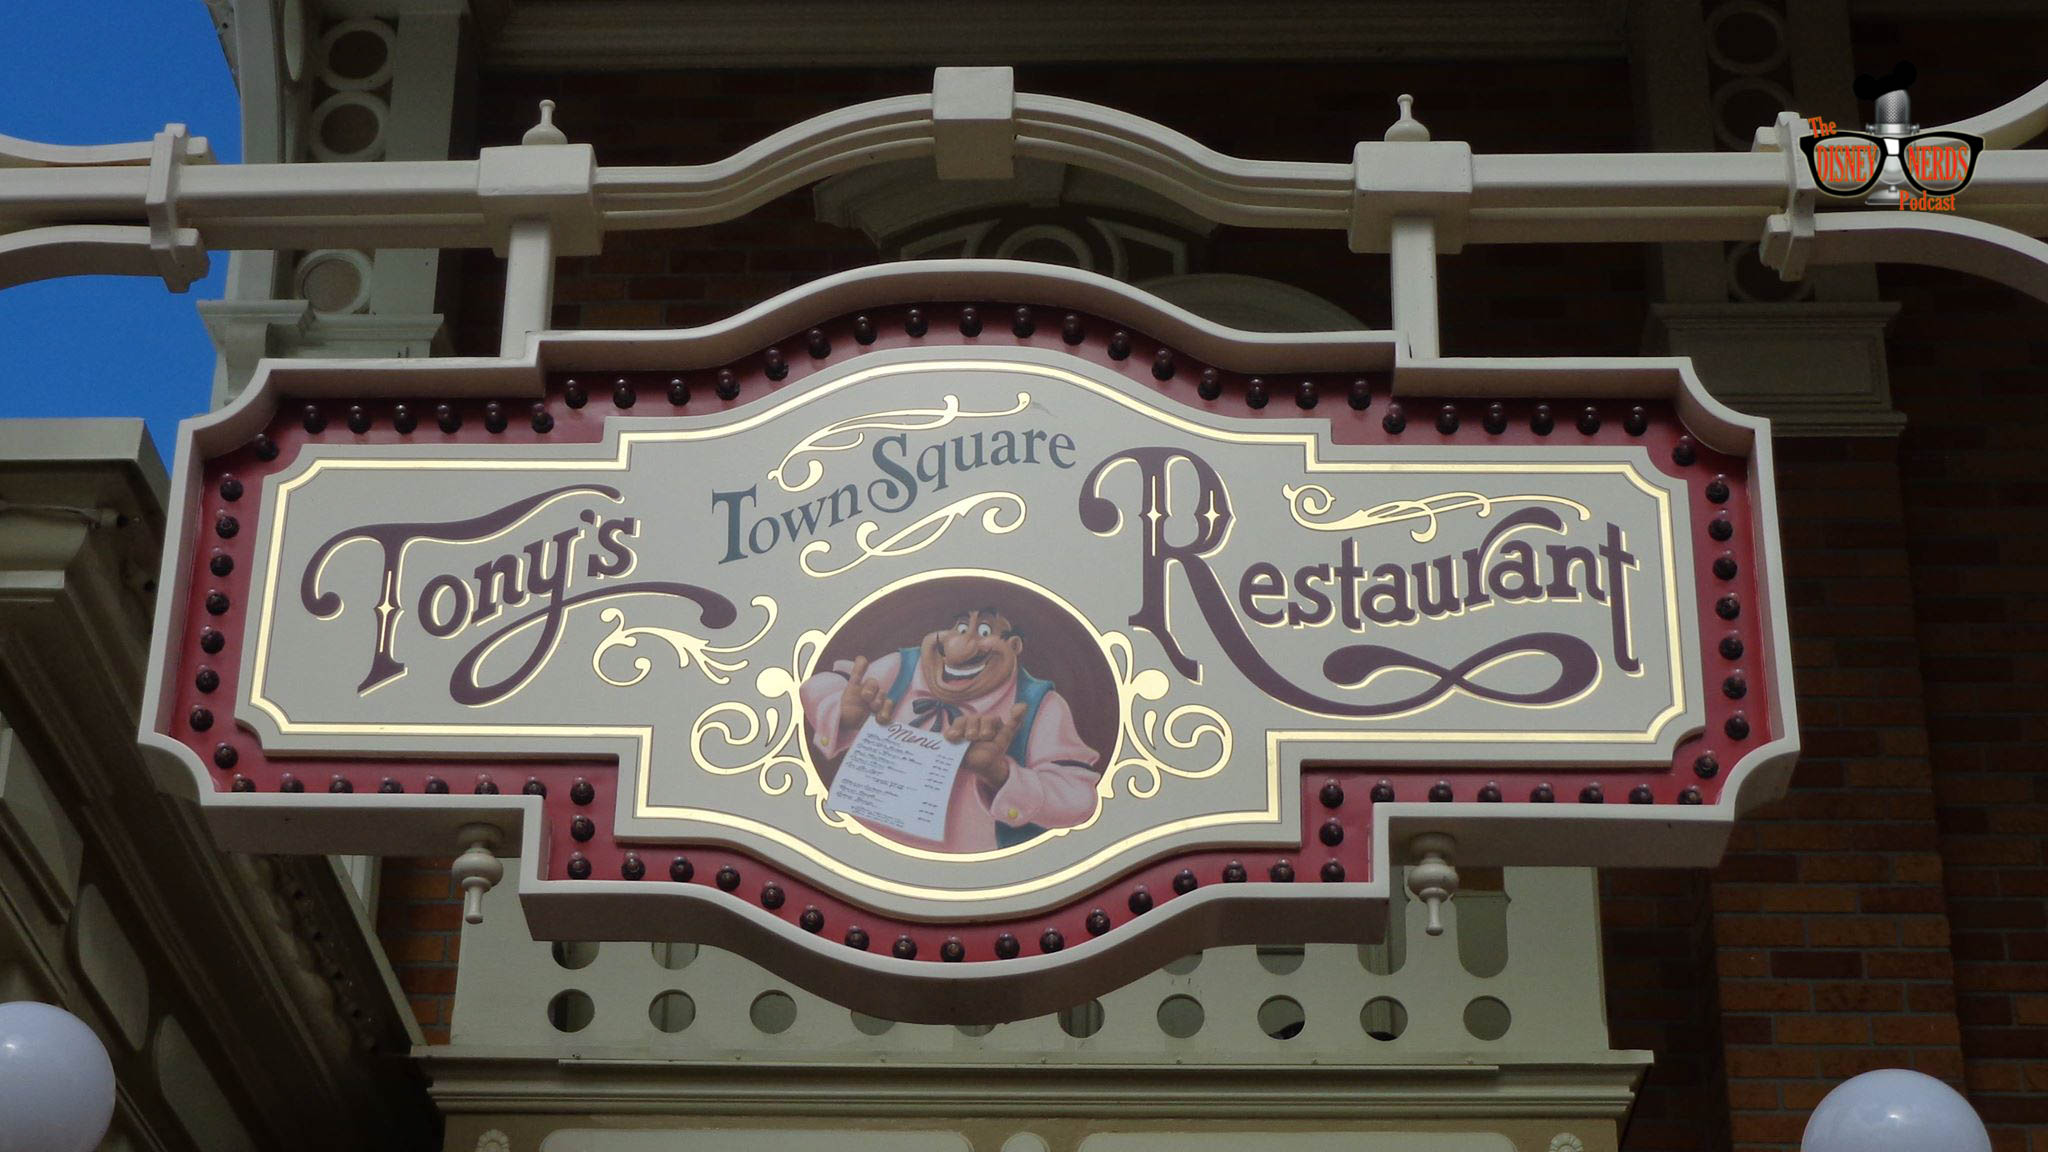 Tony’s Town Square: A Disney Nerd’s Perspective – The Disney Nerds Podcast